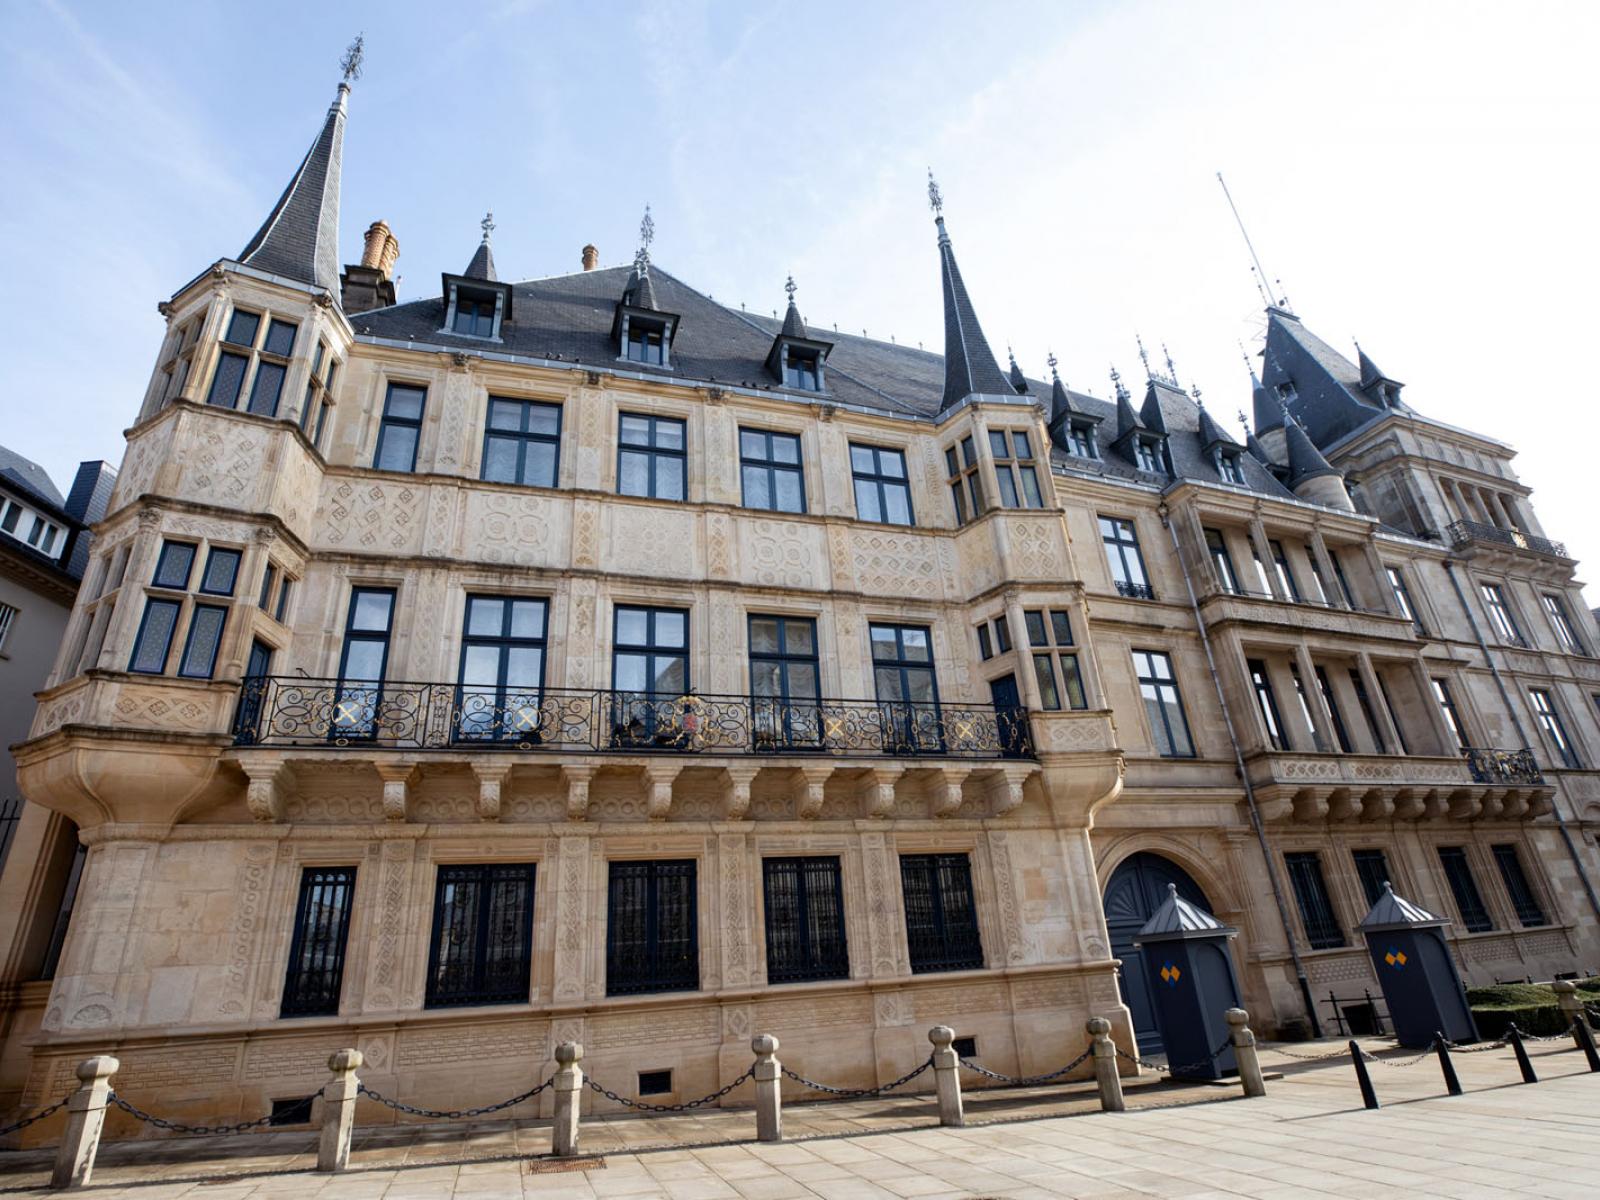 The facade of the Grand Ducal Palace